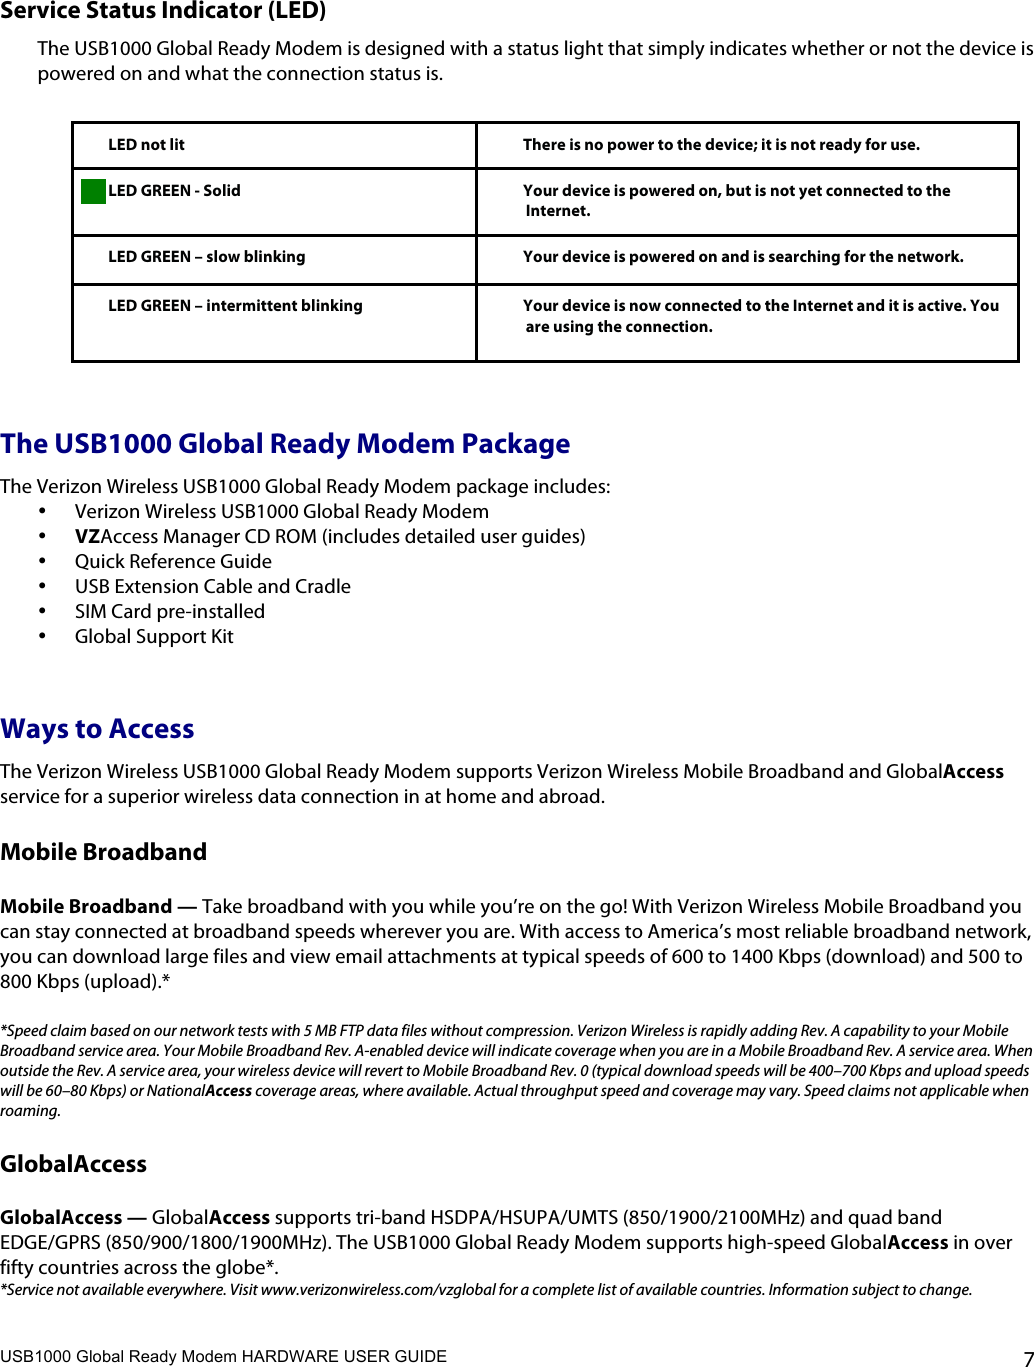 USB1000 Global Ready Modem HARDWARE USER GUIDE    7  Service Status Indicator (LED) The USB1000 Global Ready Modem is designed with a status light that simply indicates whether or not the device is powered on and what the connection status is.    LED not lit There is no power to the device; it is not ready for use.   LED GREEN - Solid Your device is powered on, but is not yet connected to the Internet.   LED GREEN – slow blinking  Your device is powered on and is searching for the network.   LED GREEN – intermittent blinking Your device is now connected to the Internet and it is active. You are using the connection.  The USB1000 Global Ready Modem Package The Verizon Wireless USB1000 Global Ready Modem package includes: • Verizon Wireless USB1000 Global Ready Modem • VZAccess Manager CD ROM (includes detailed user guides) • Quick Reference Guide  • USB Extension Cable and Cradle • SIM Card pre-installed • Global Support Kit  Ways to Access The Verizon Wireless USB1000 Global Ready Modem supports Verizon Wireless Mobile Broadband and GlobalAccess service for a superior wireless data connection in at home and abroad.  Mobile Broadband   Mobile Broadband — Take broadband with you while you’re on the go! With Verizon Wireless Mobile Broadband you can stay connected at broadband speeds wherever you are. With access to America’s most reliable broadband network, you can download large files and view email attachments at typical speeds of 600 to 1400 Kbps (download) and 500 to 800 Kbps (upload).*  *Speed claim based on our network tests with 5 MB FTP data files without compression. Verizon Wireless is rapidly adding Rev. A capability to your Mobile Broadband service area. Your Mobile Broadband Rev. A-enabled device will indicate coverage when you are in a Mobile Broadband Rev. A service area. When outside the Rev. A service area, your wireless device will revert to Mobile Broadband Rev. 0 (typical download speeds will be 400–700 Kbps and upload speeds will be 60–80 Kbps) or NationalAccess coverage areas, where available. Actual throughput speed and coverage may vary. Speed claims not applicable when roaming. GlobalAccess  GlobalAccess — GlobalAccess supports tri-band HSDPA/HSUPA/UMTS (850/1900/2100MHz) and quad band EDGE/GPRS (850/900/1800/1900MHz). The USB1000 Global Ready Modem supports high-speed GlobalAccess in over fifty countries across the globe*. *Service not available everywhere. Visit www.verizonwireless.com/vzglobal for a complete list of available countries. Information subject to change.  